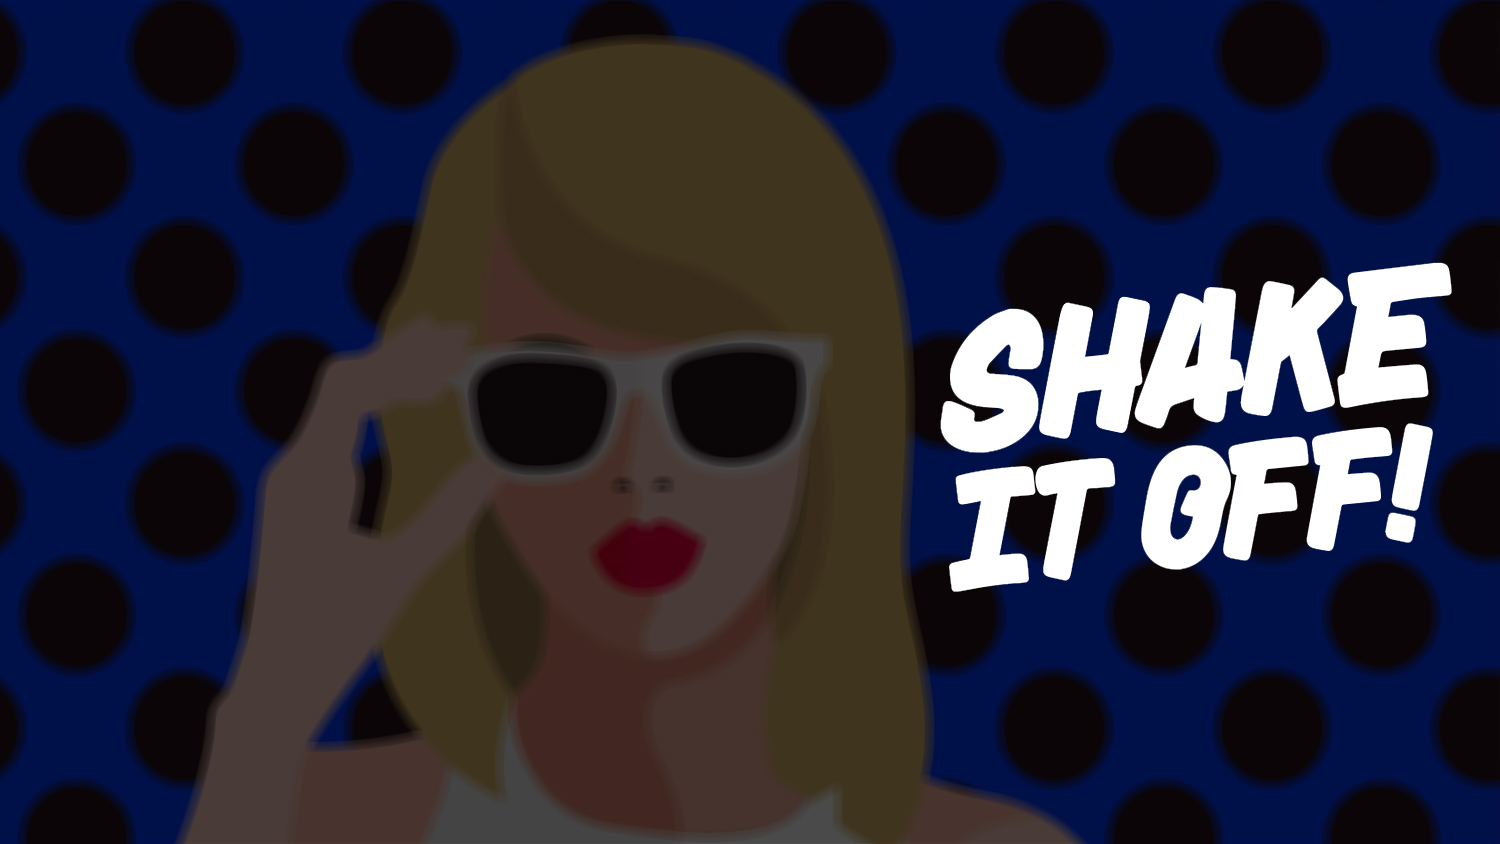 Shake it off Manchester